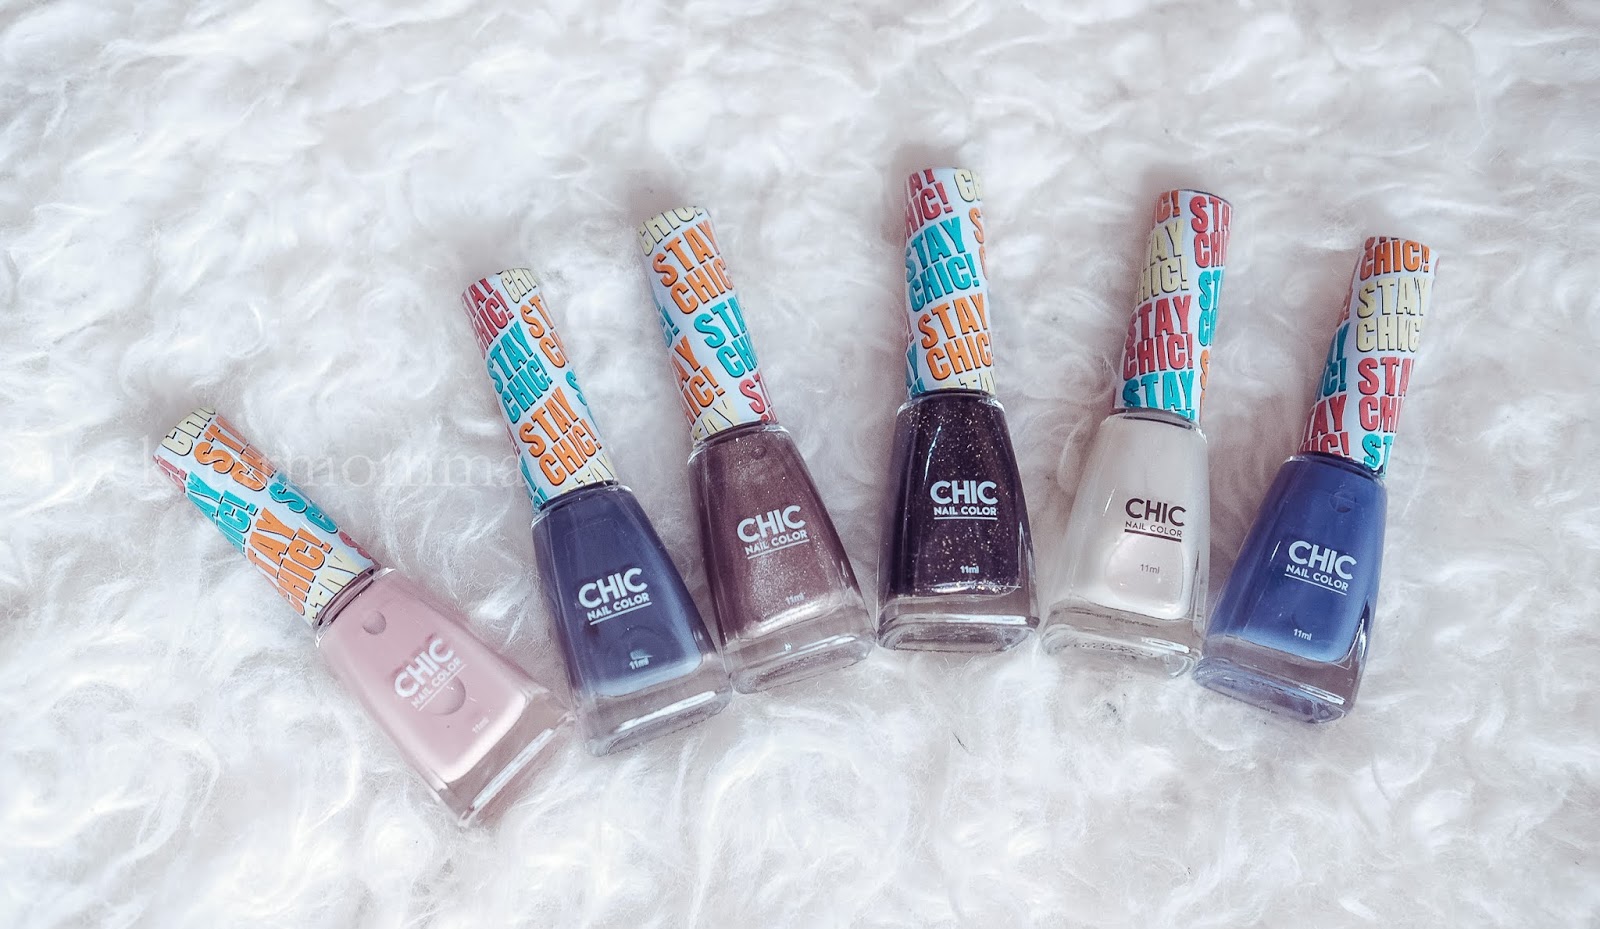 6. "Unexpectedly Chic" Nail Polish Collection by Butter London - wide 9